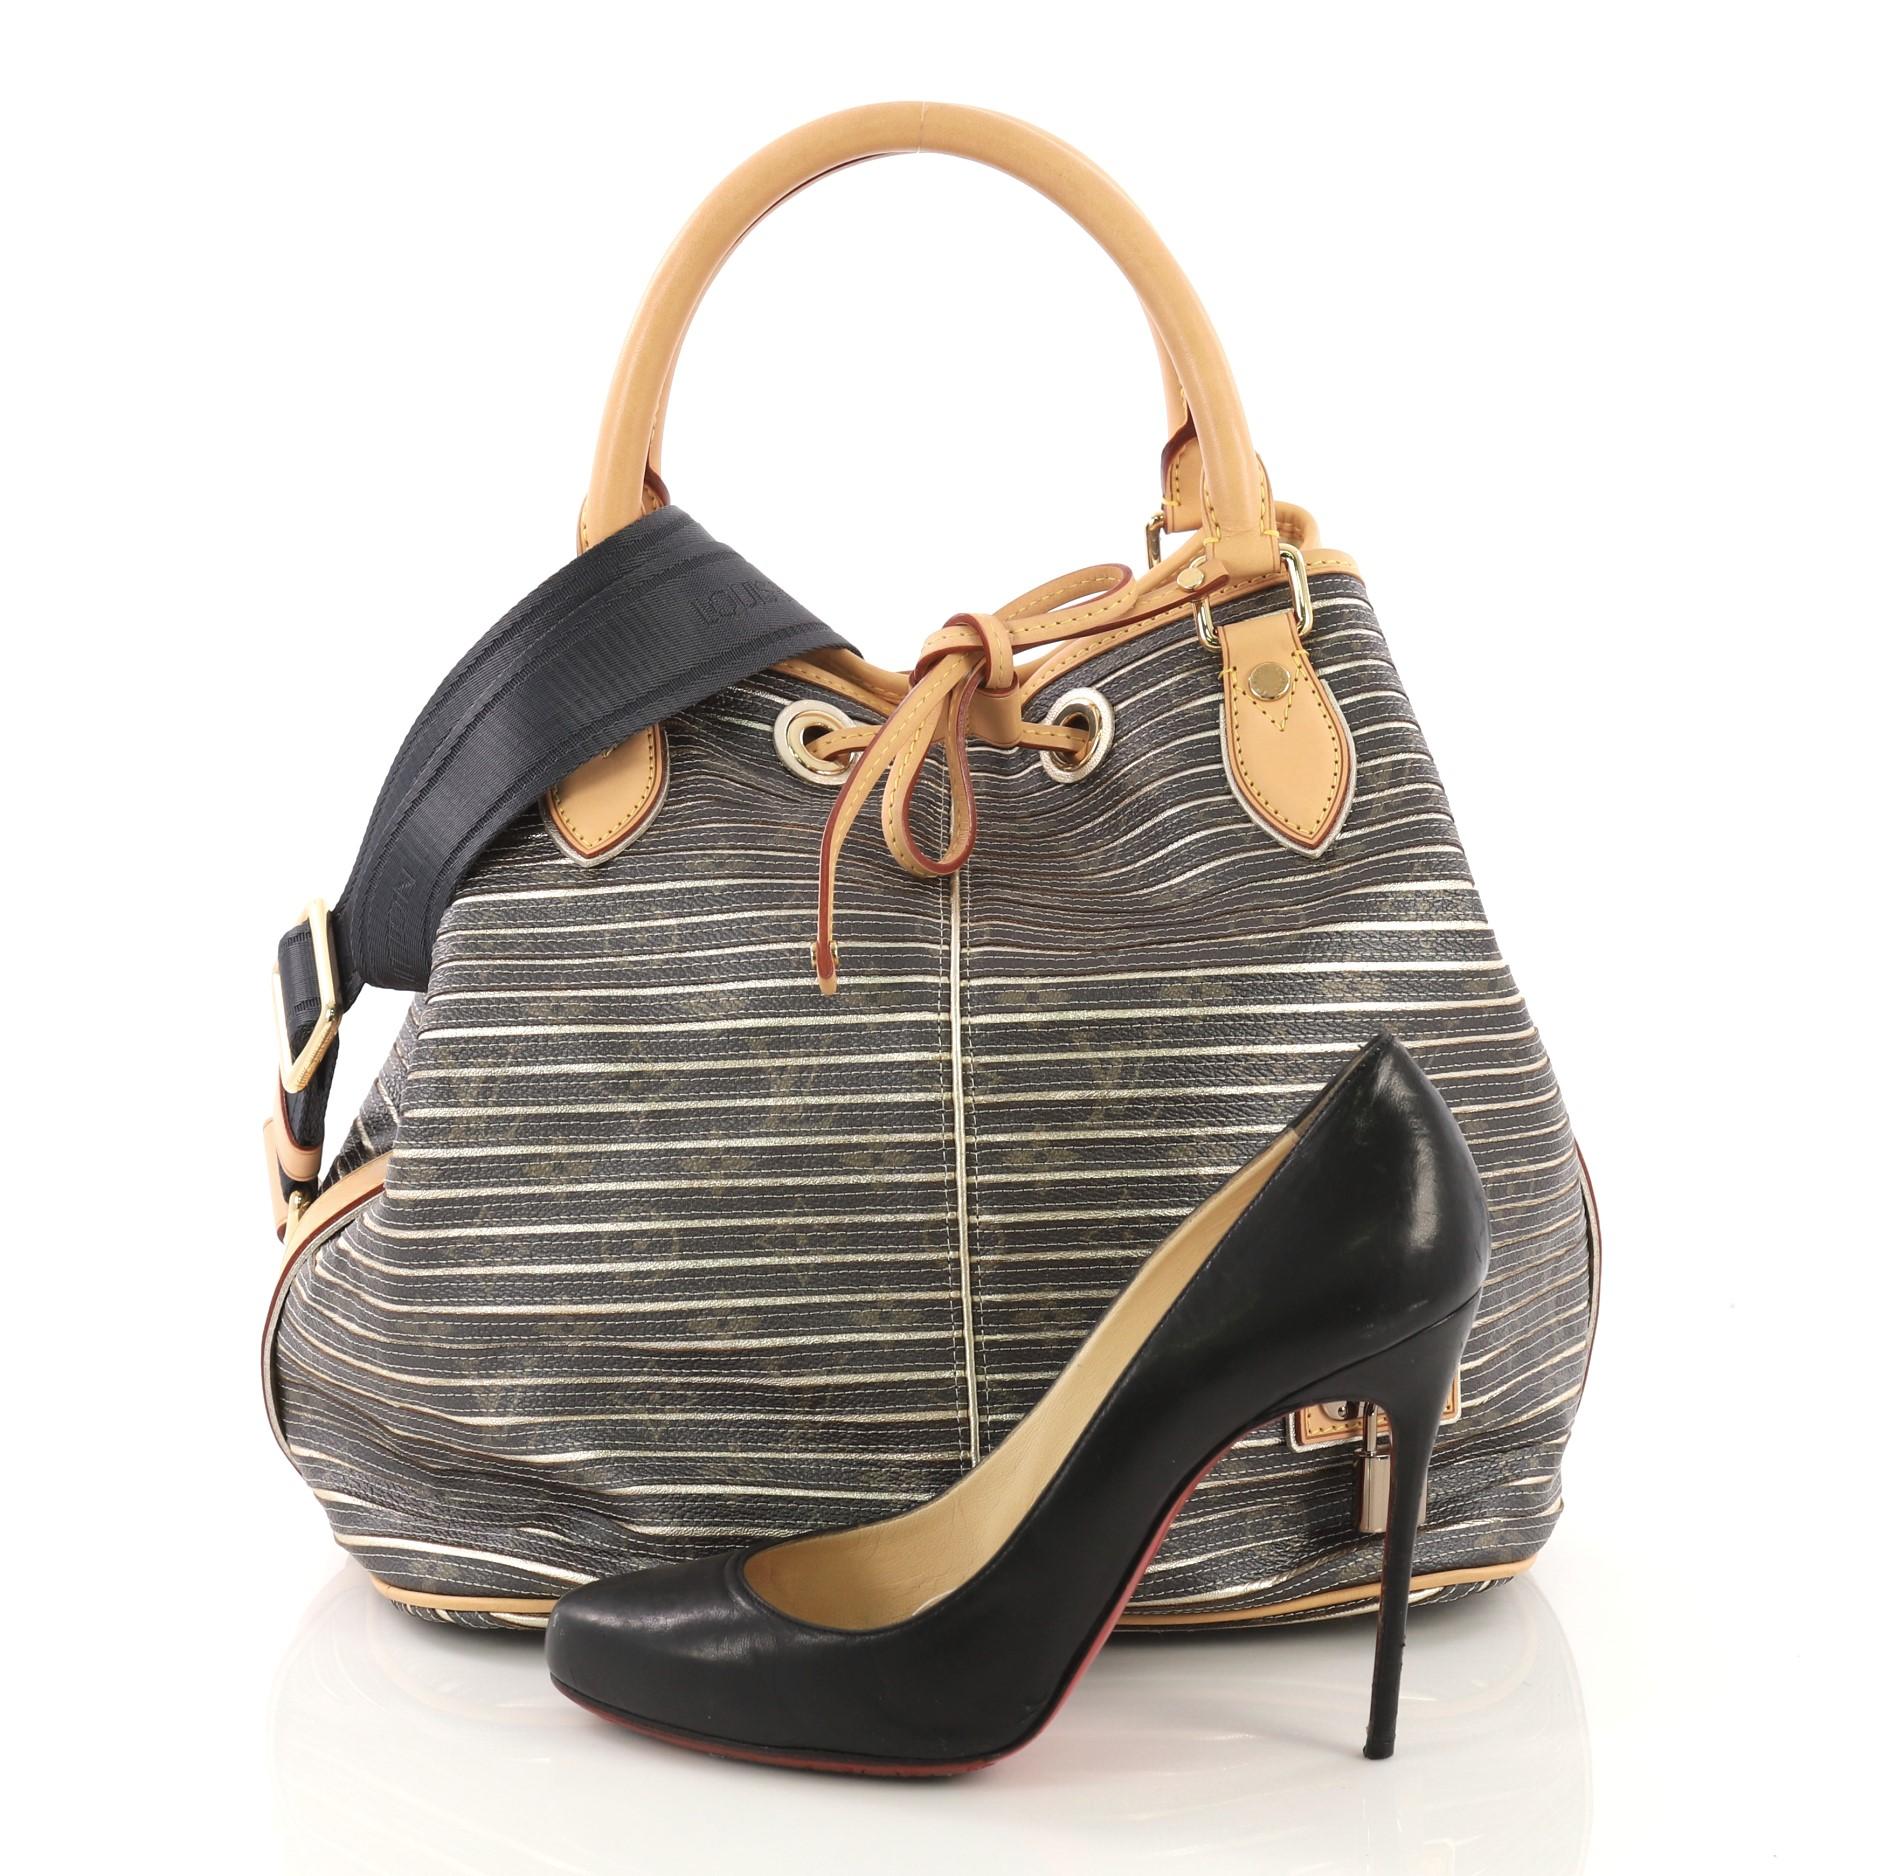 This Louis Vuitton Neo Shoulder Bag Limited Edition Monogram Eden, crafted from brown monogram canvas with metallic stripes, features dual rolled handles, cowhide leather trim, decorative LV lock, and gold-tone hardware. Its drawstring closure opens